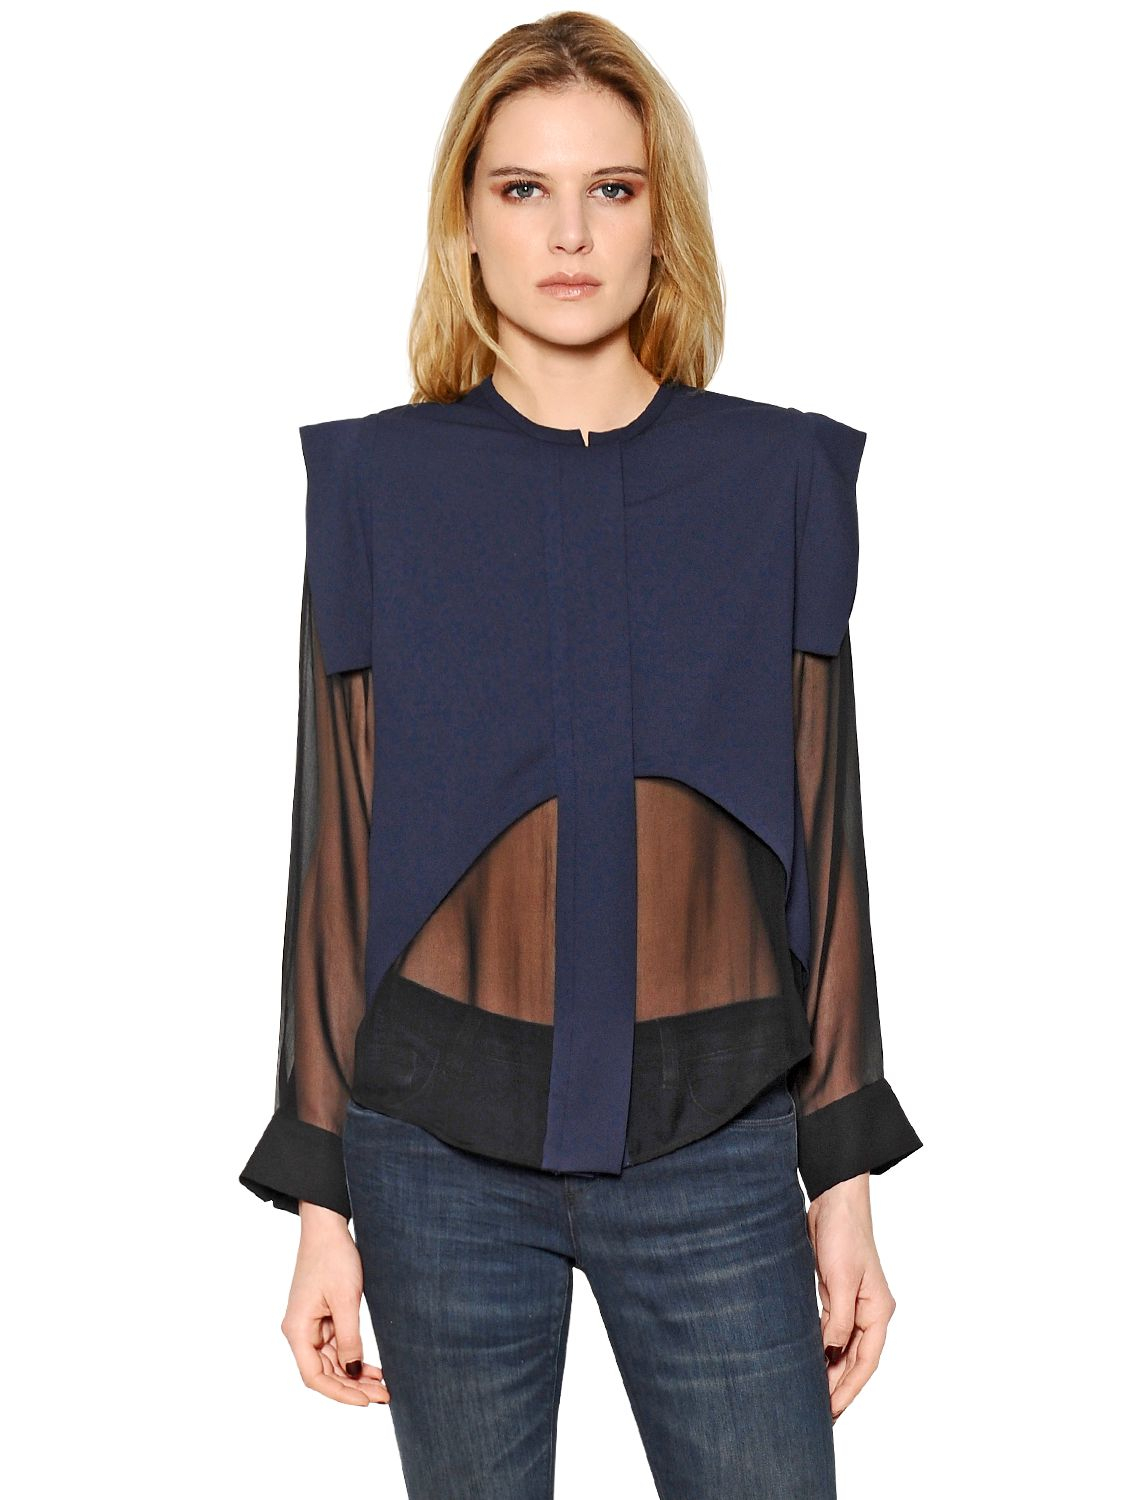 Lyst - Iro Silk Crepe Shirt with Sheer Details in Blue